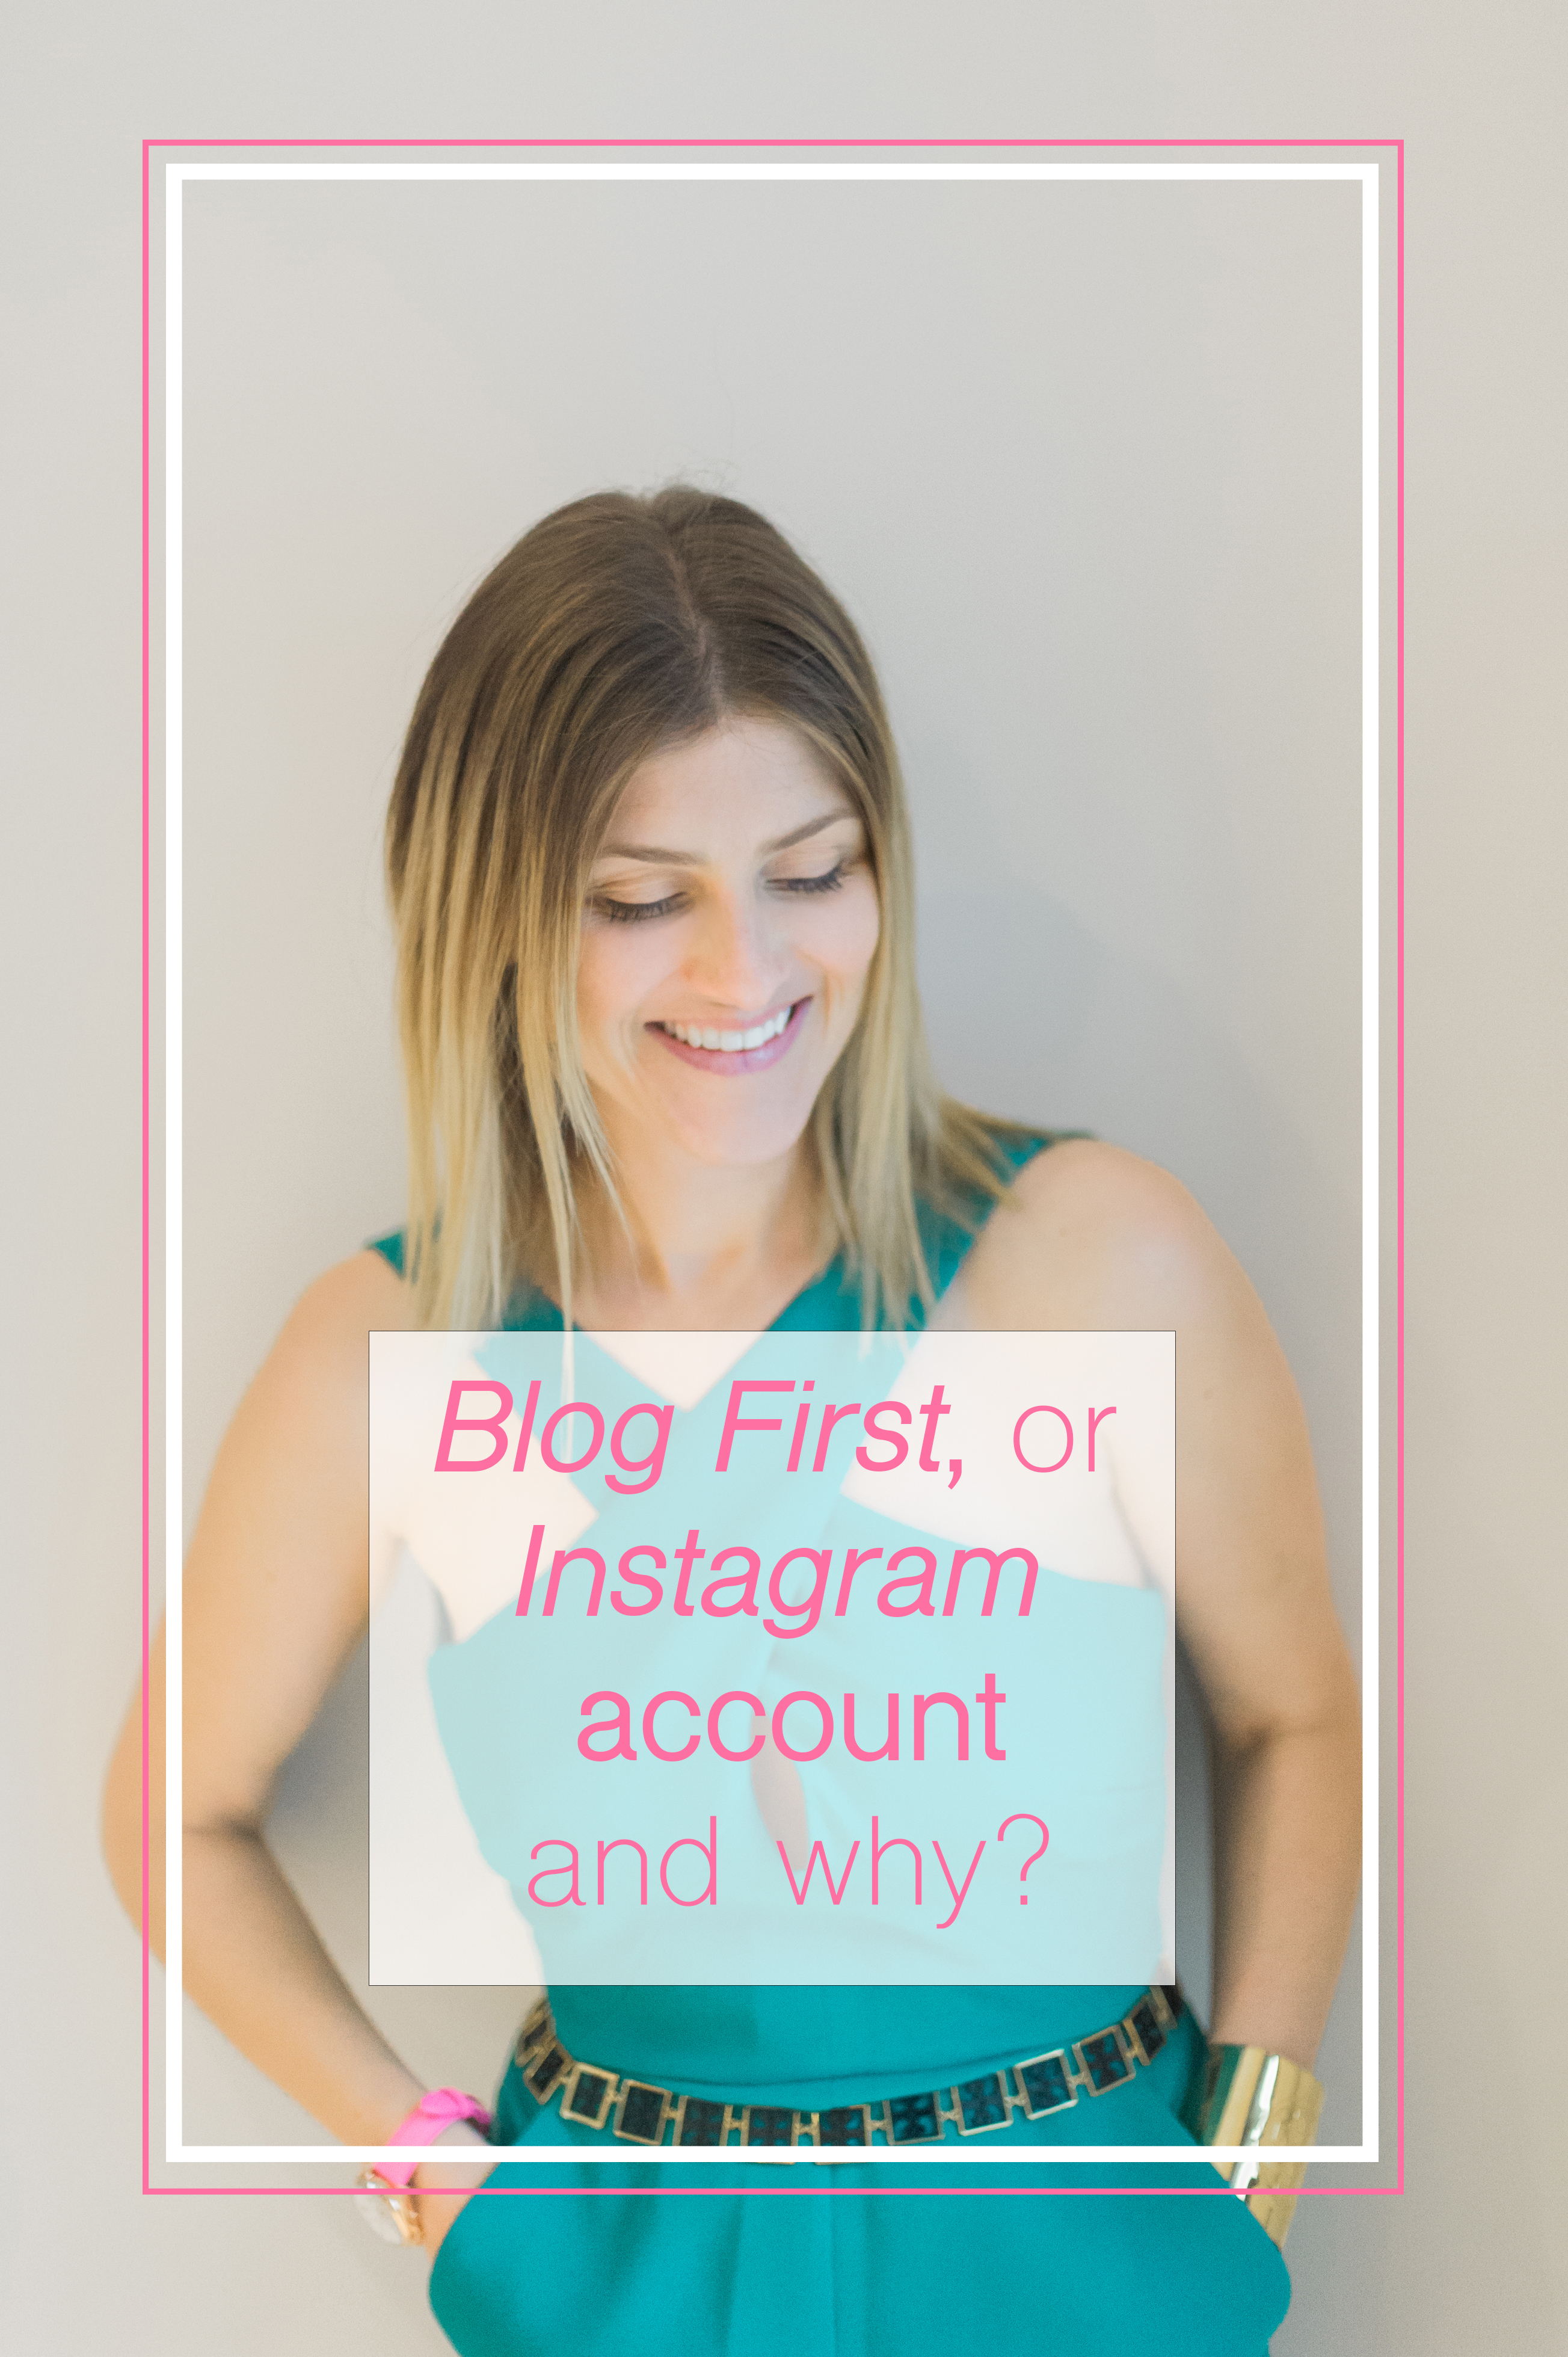 blog first or instagram account and why - hey everyone we re incredibly close to 100 followers on instagram